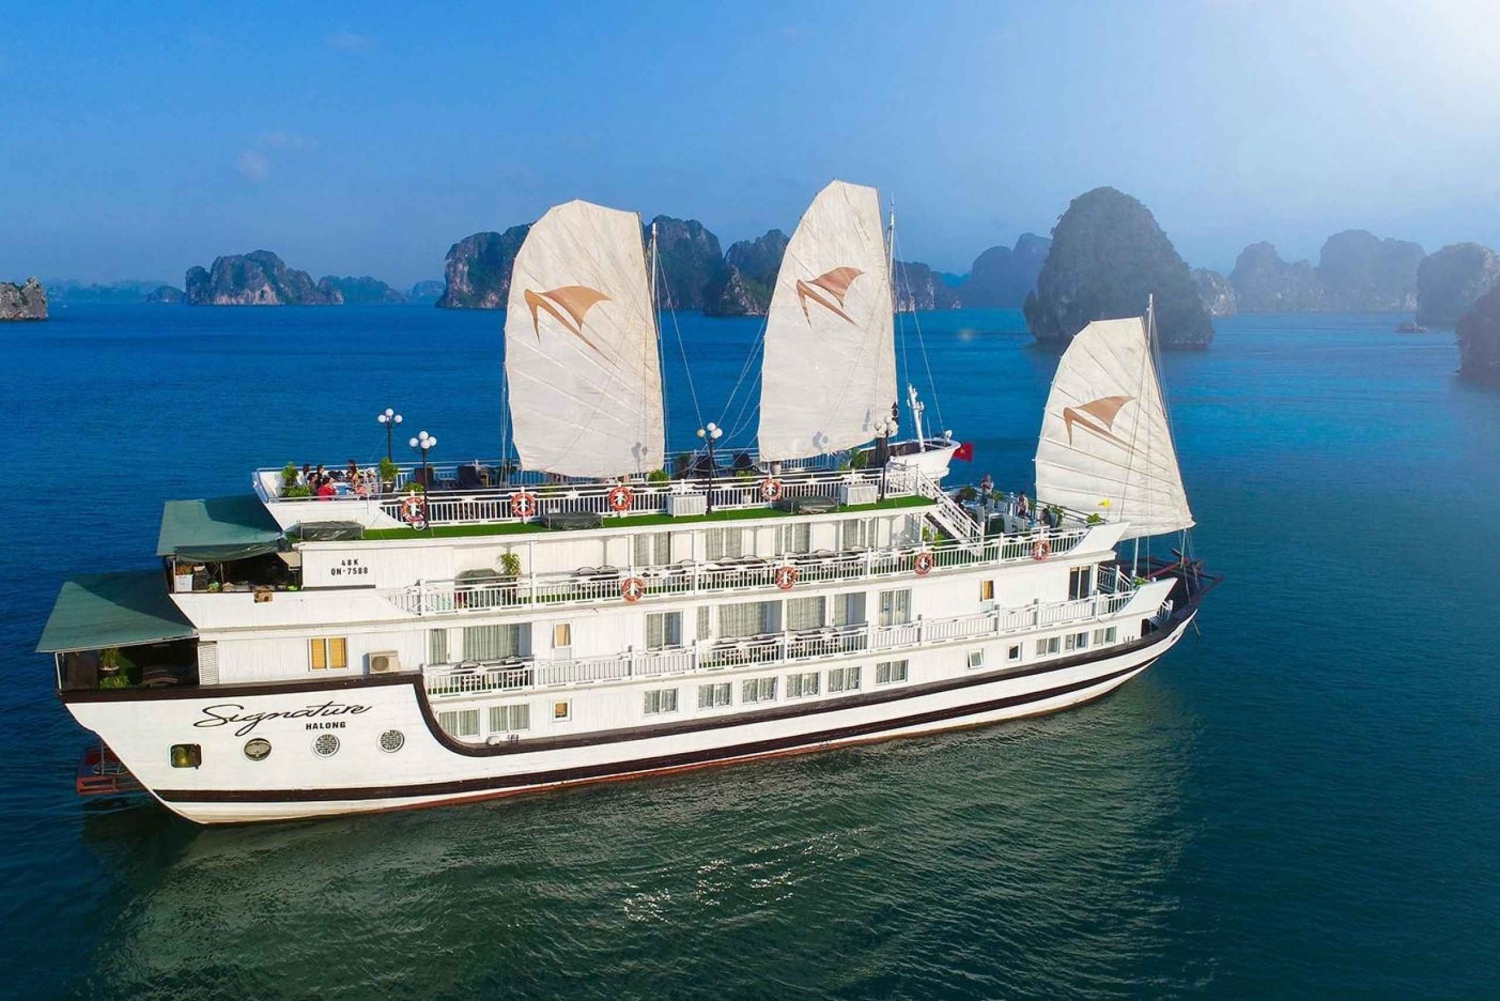 From Hanoi: 3D2N Halong Bay, BaiTuLong by Signature Cruise